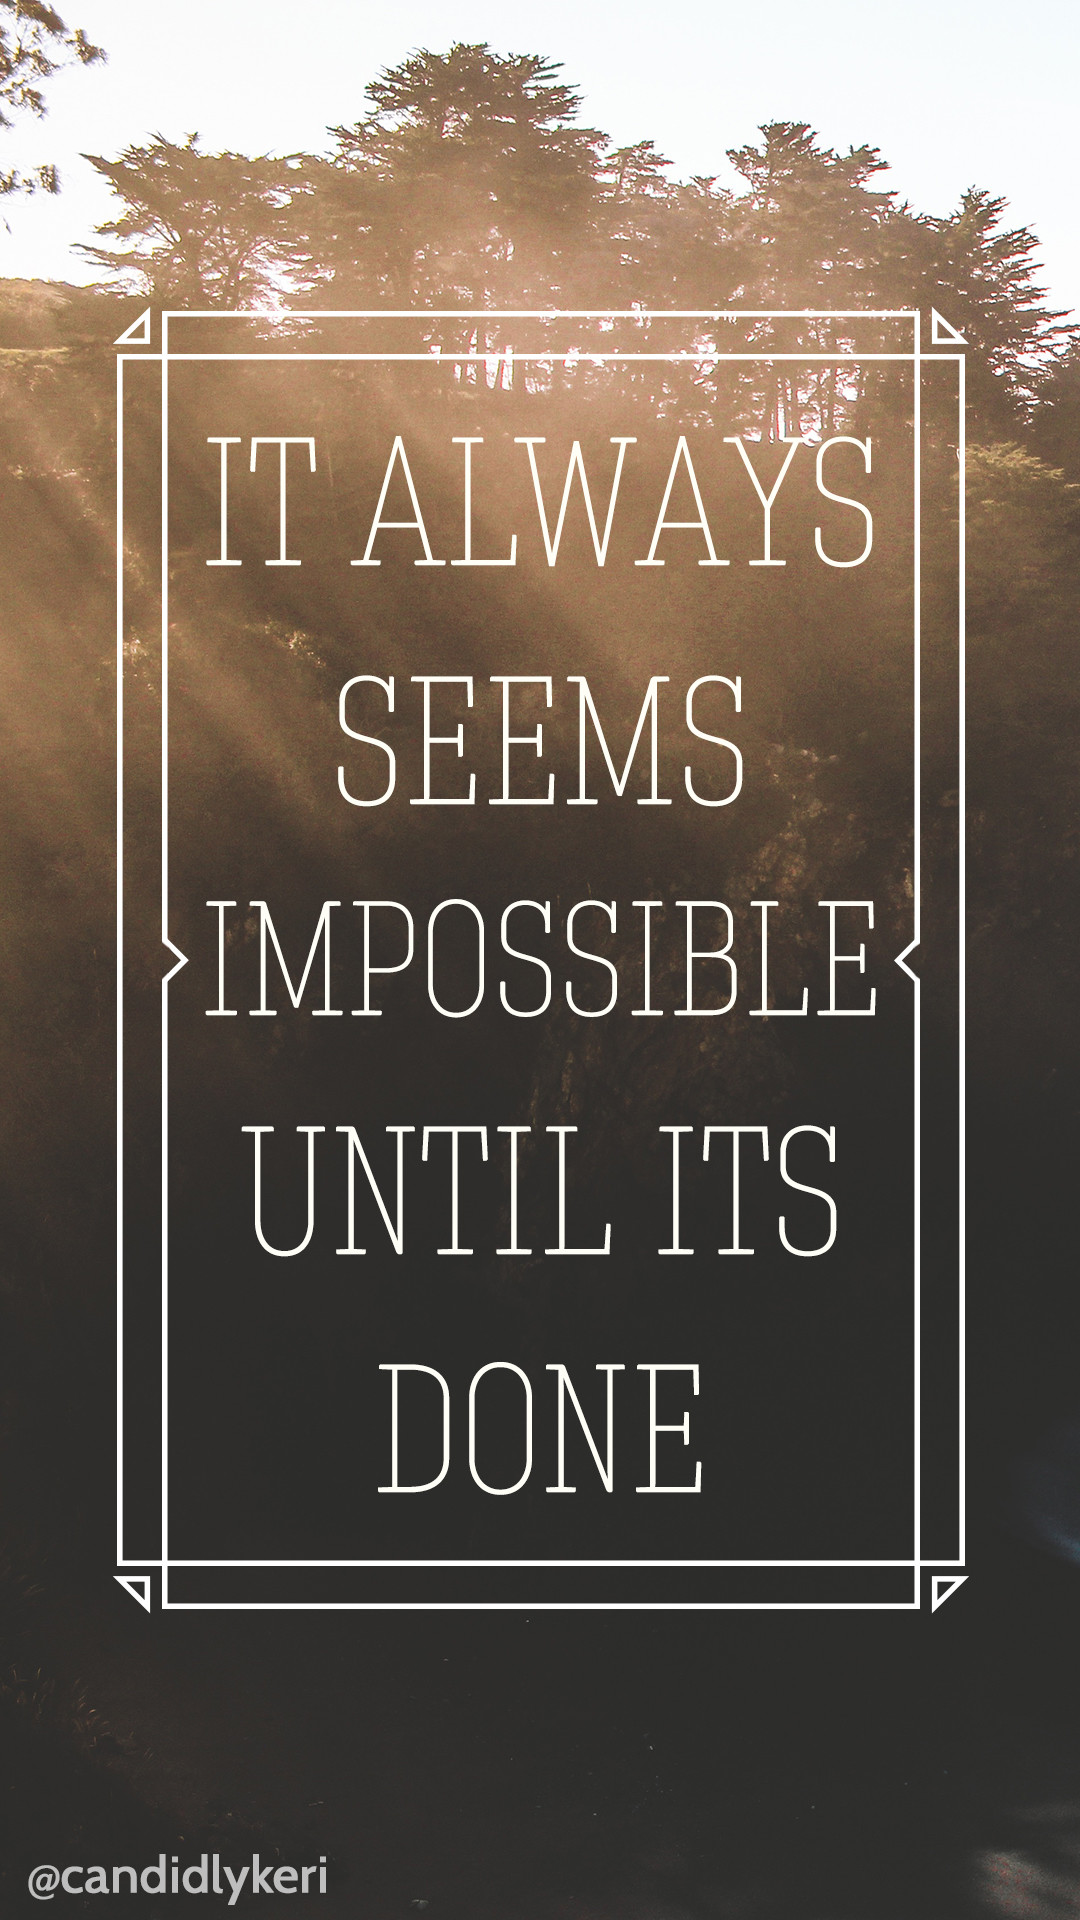 1080x1920 "It always seems impossible until it's done" quote ocean for wallpaper on  desktop,